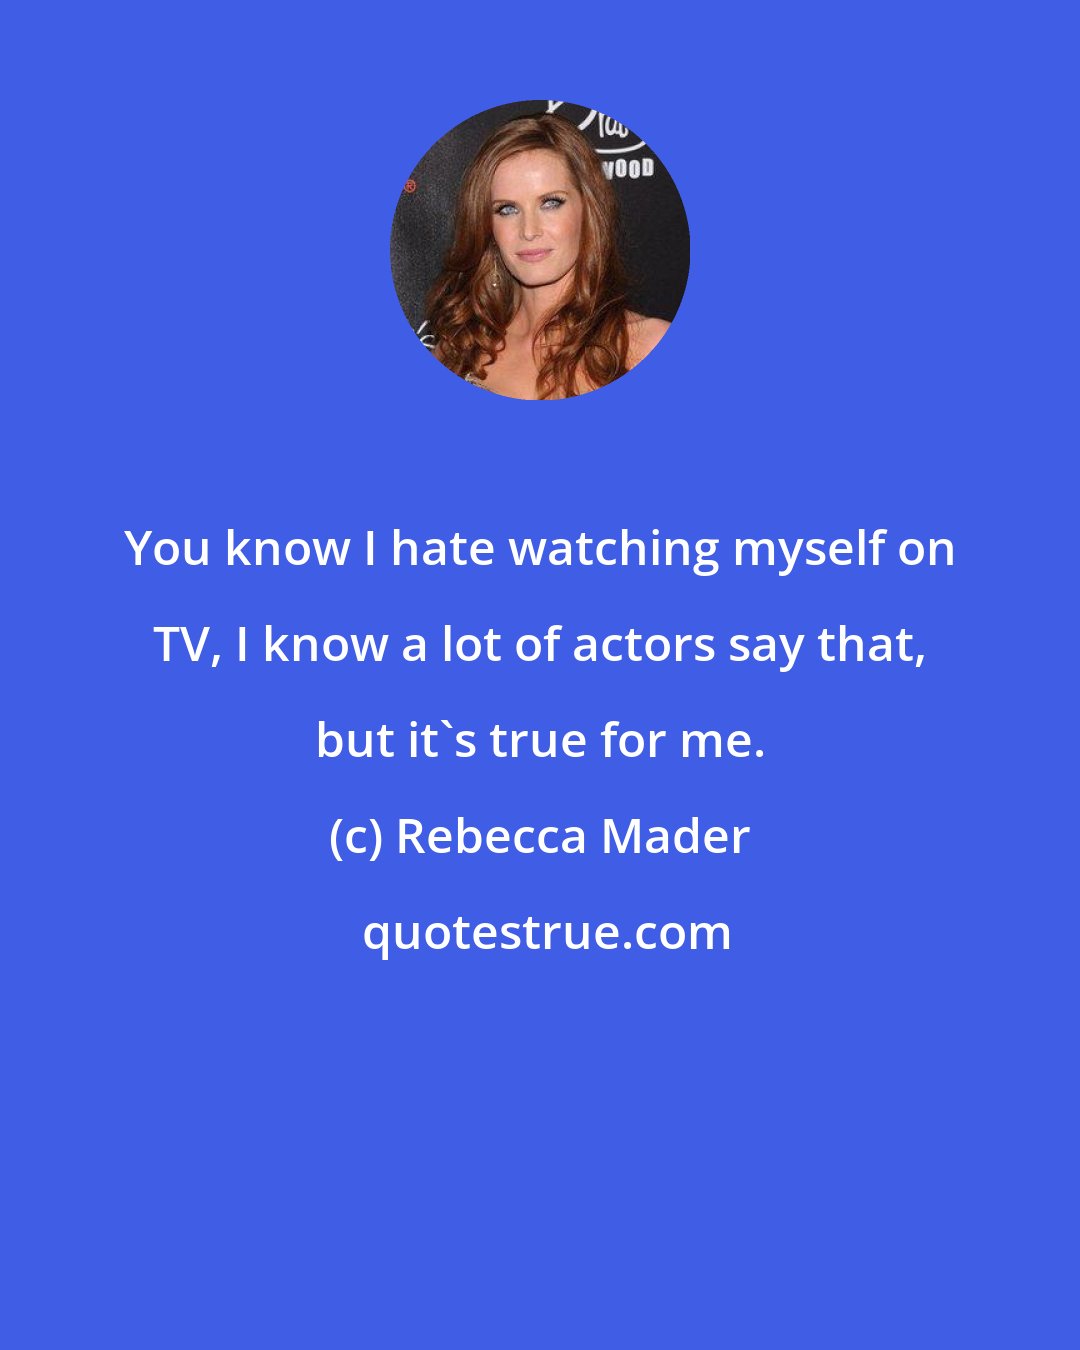 Rebecca Mader: You know I hate watching myself on TV, I know a lot of actors say that, but it's true for me.